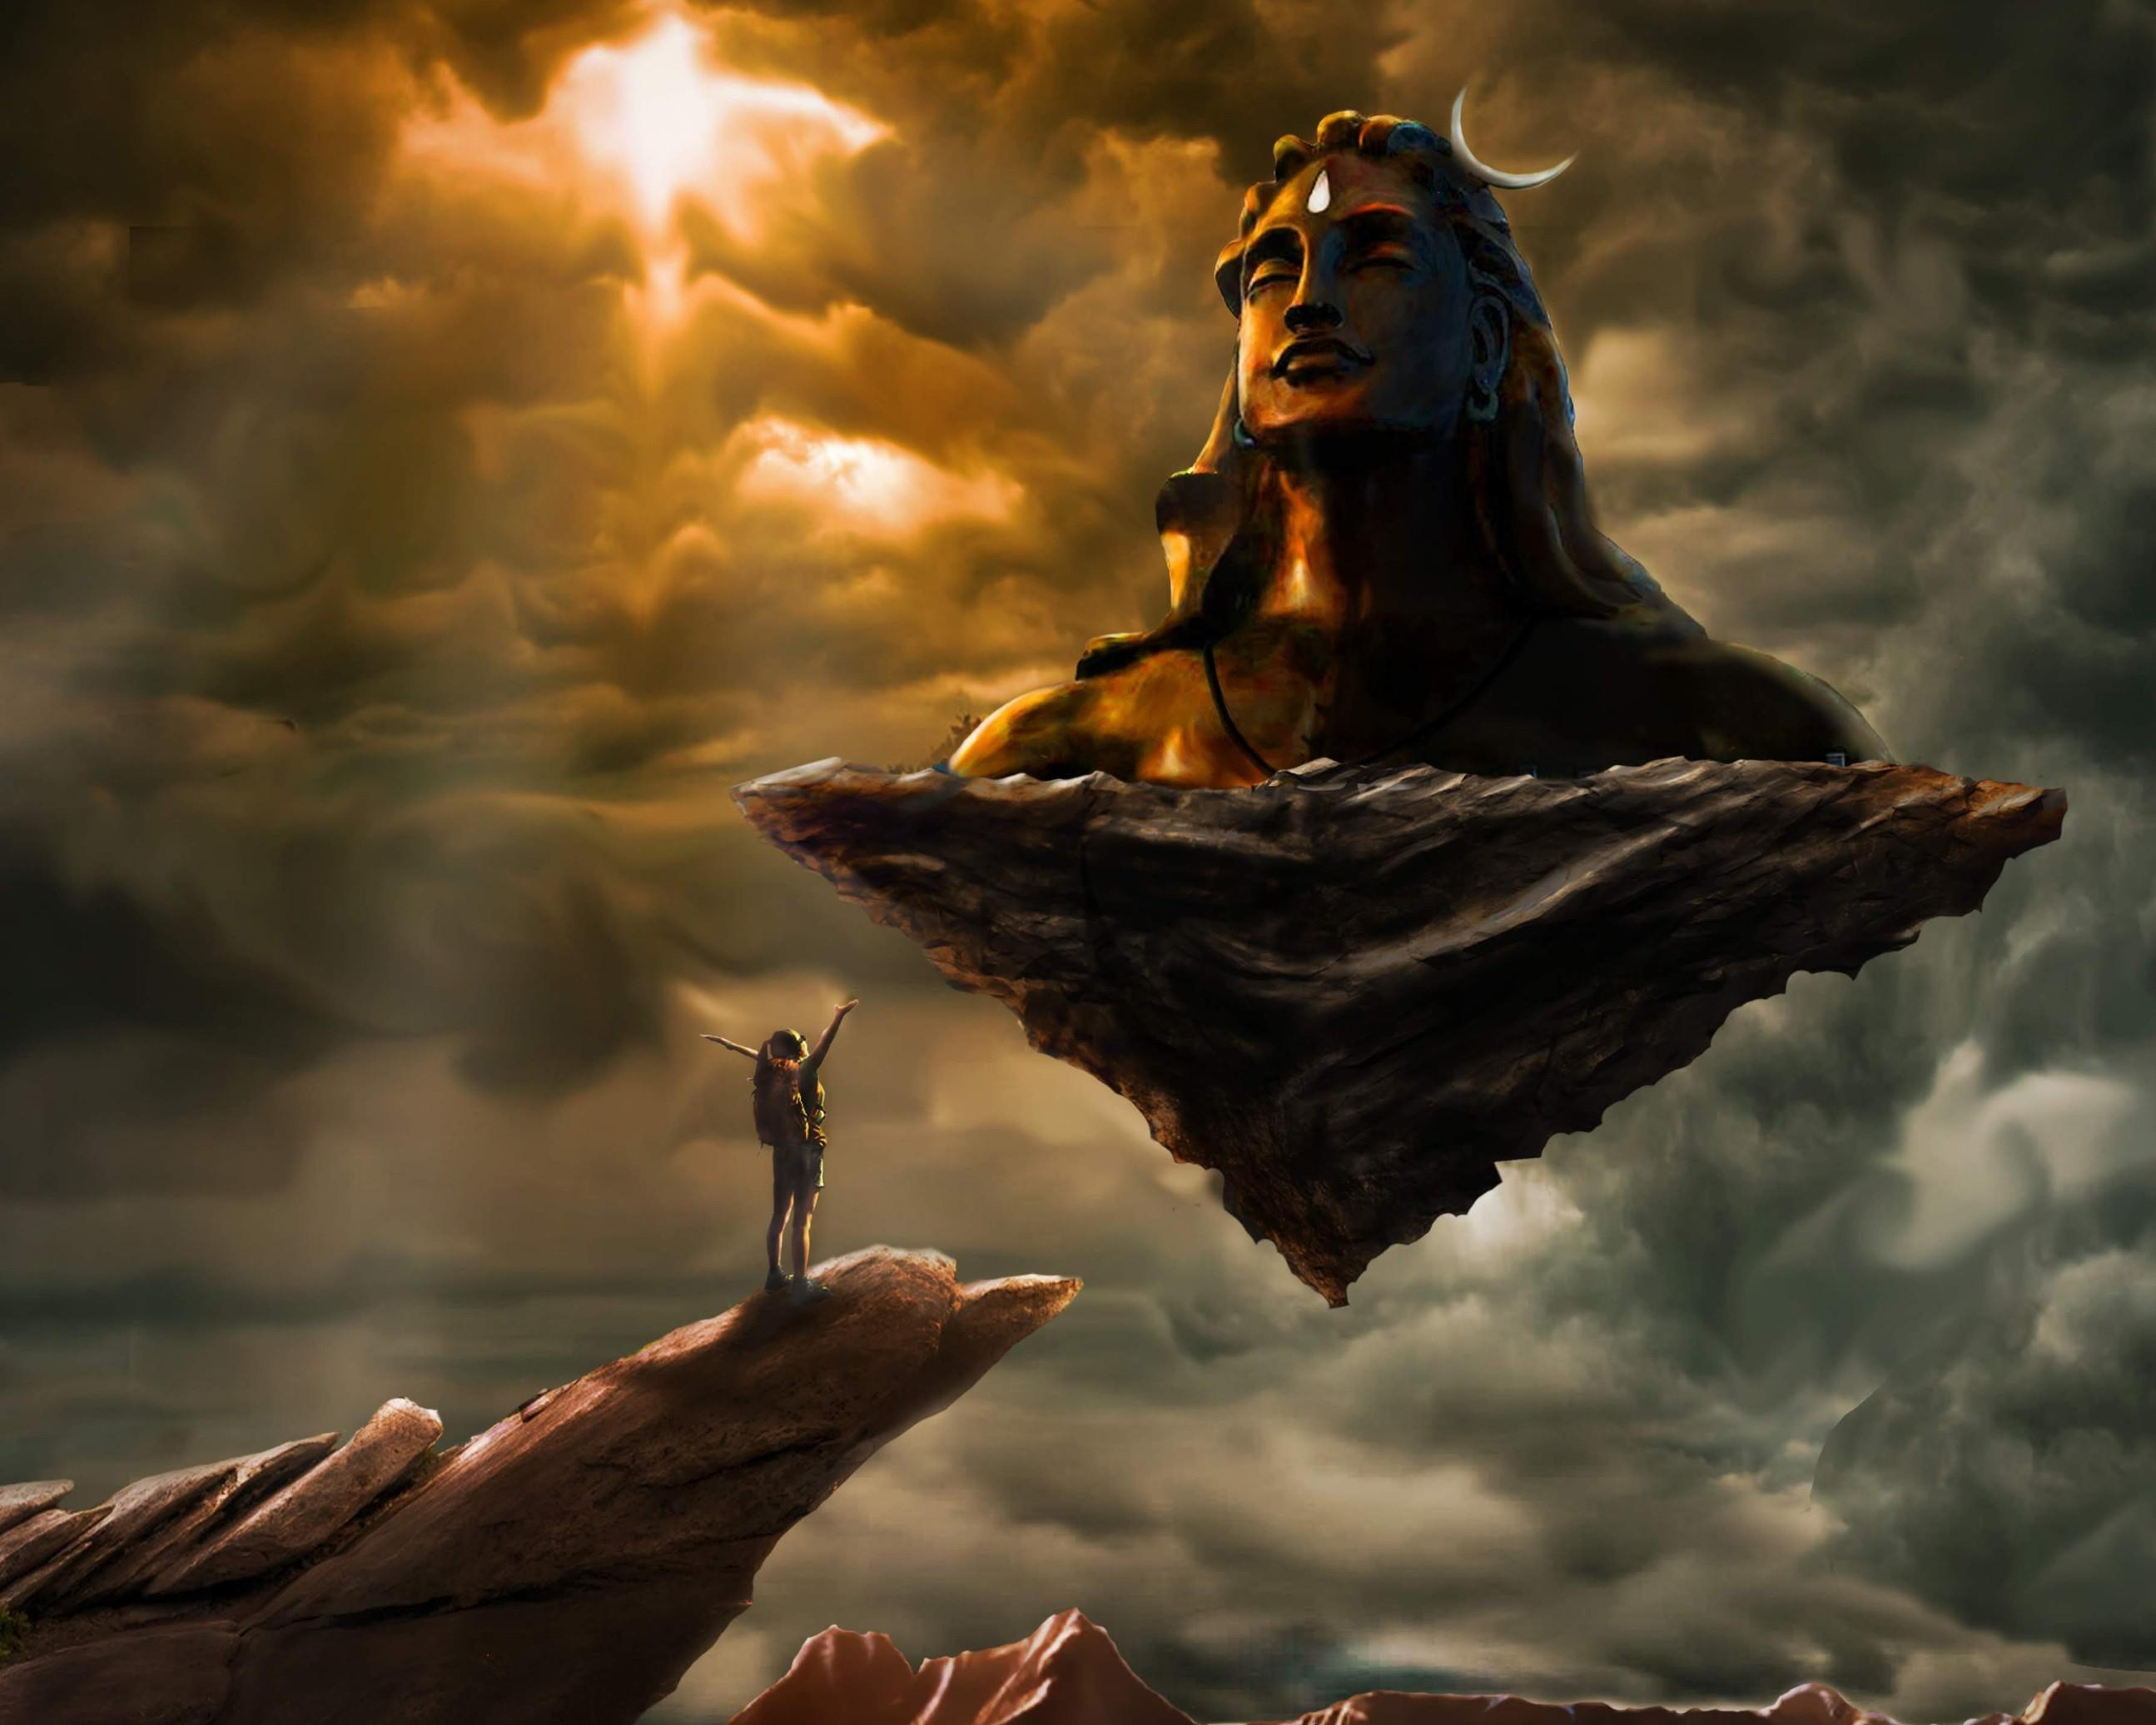 Shiva 4K wallpaper for your desktop or mobile screen free and easy to download